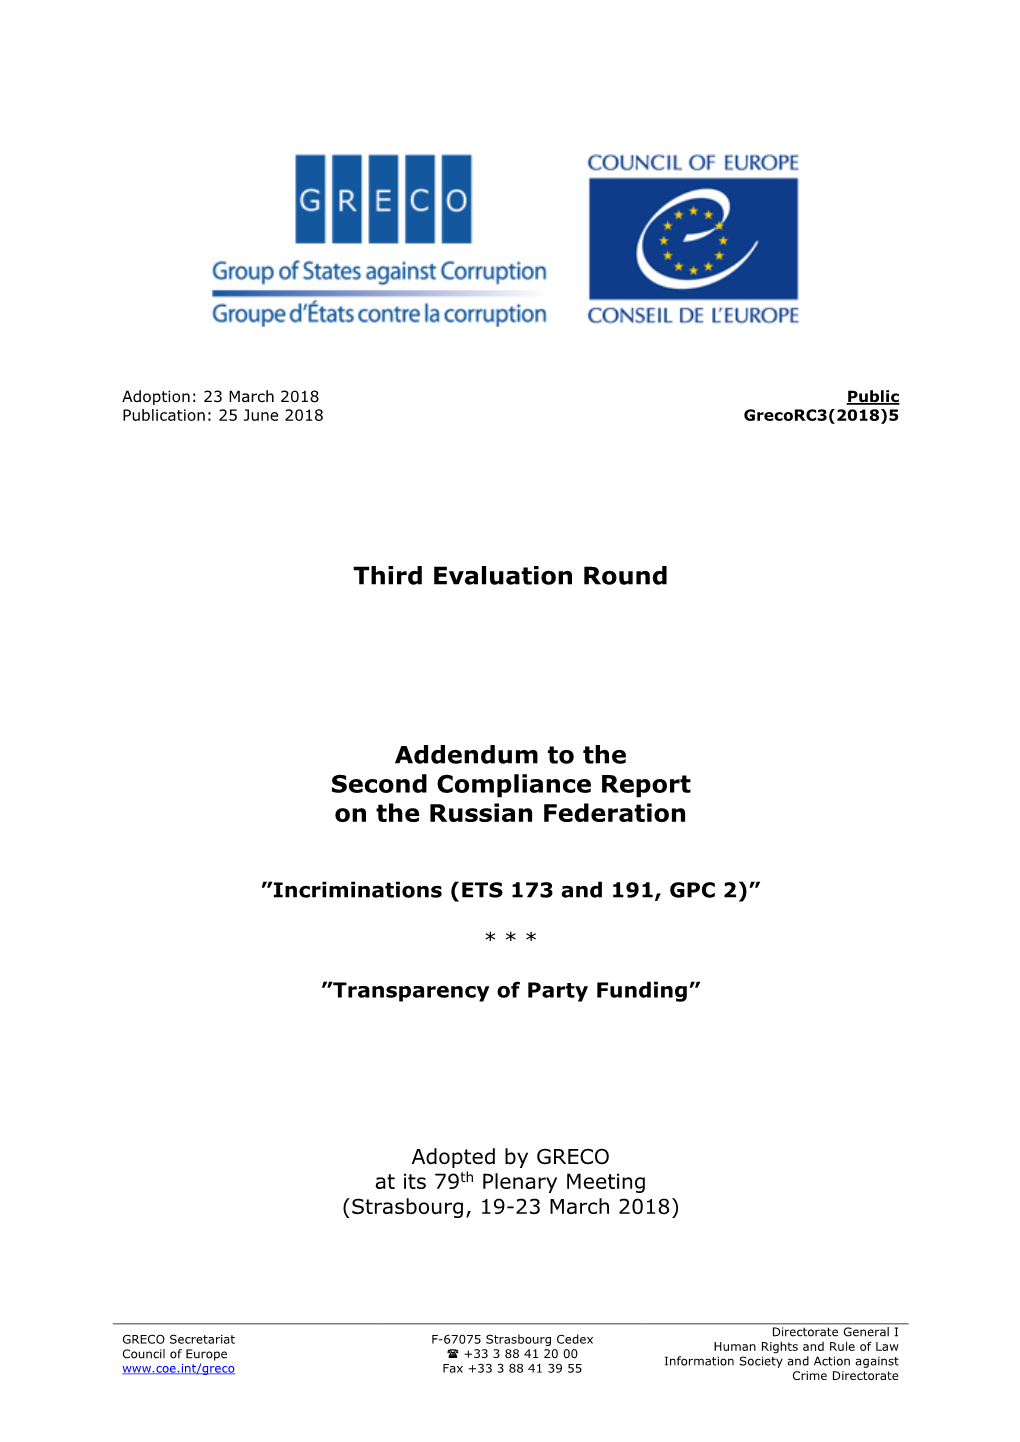 Third Evaluation Round Addendum to the Second Compliance Report On